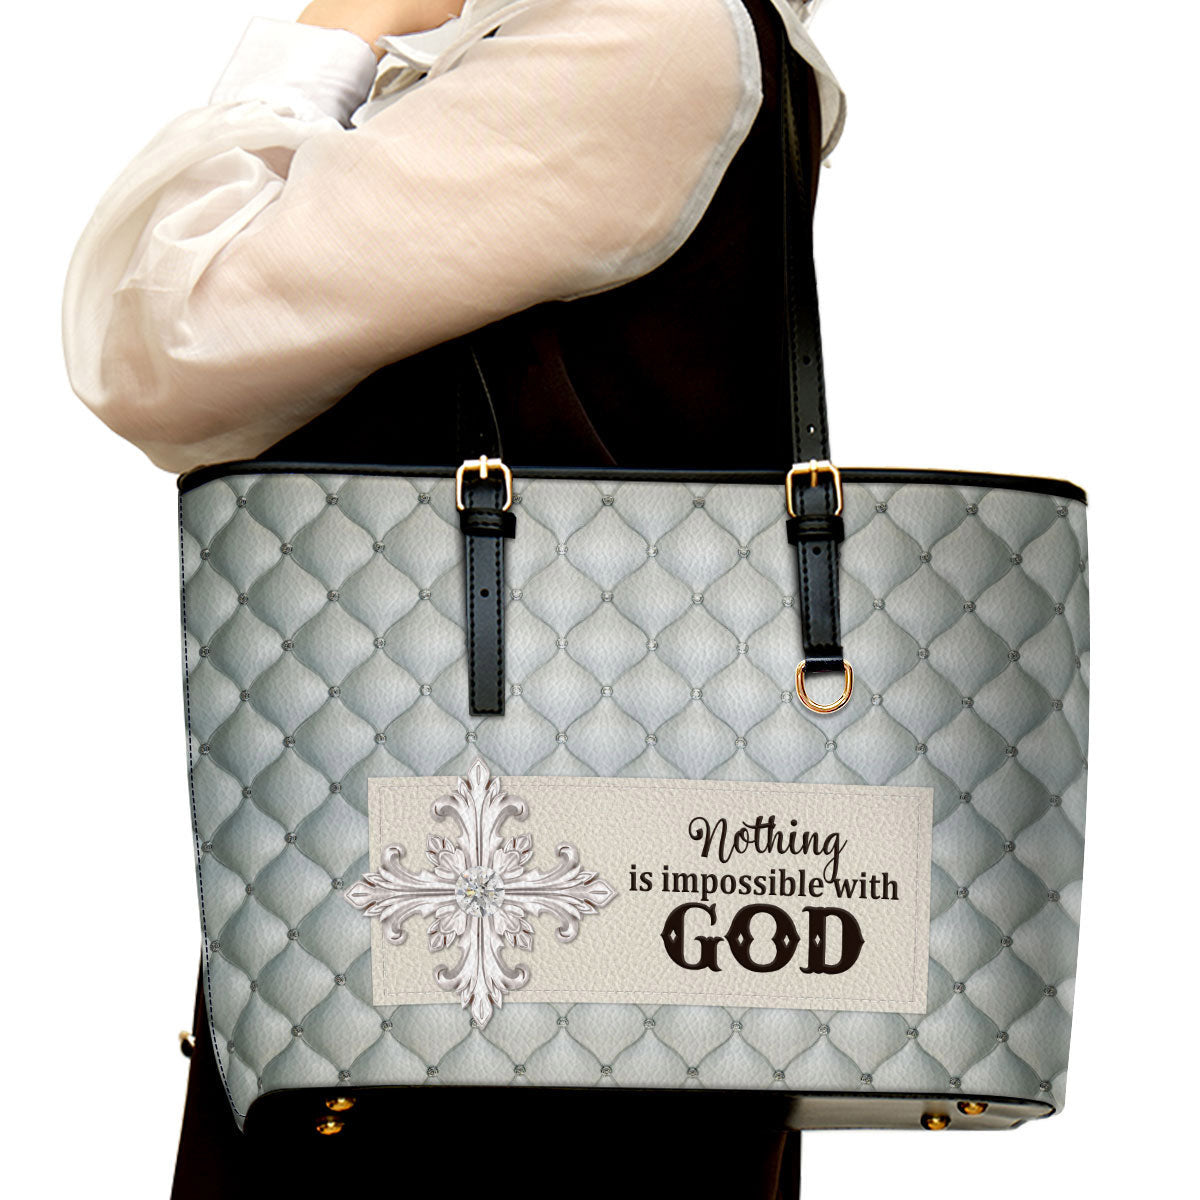 Nothing Is Impossible With God Cross Large Leather Tote Bag - Christ Gifts For Religious Women - Best Mother's Day Gifts